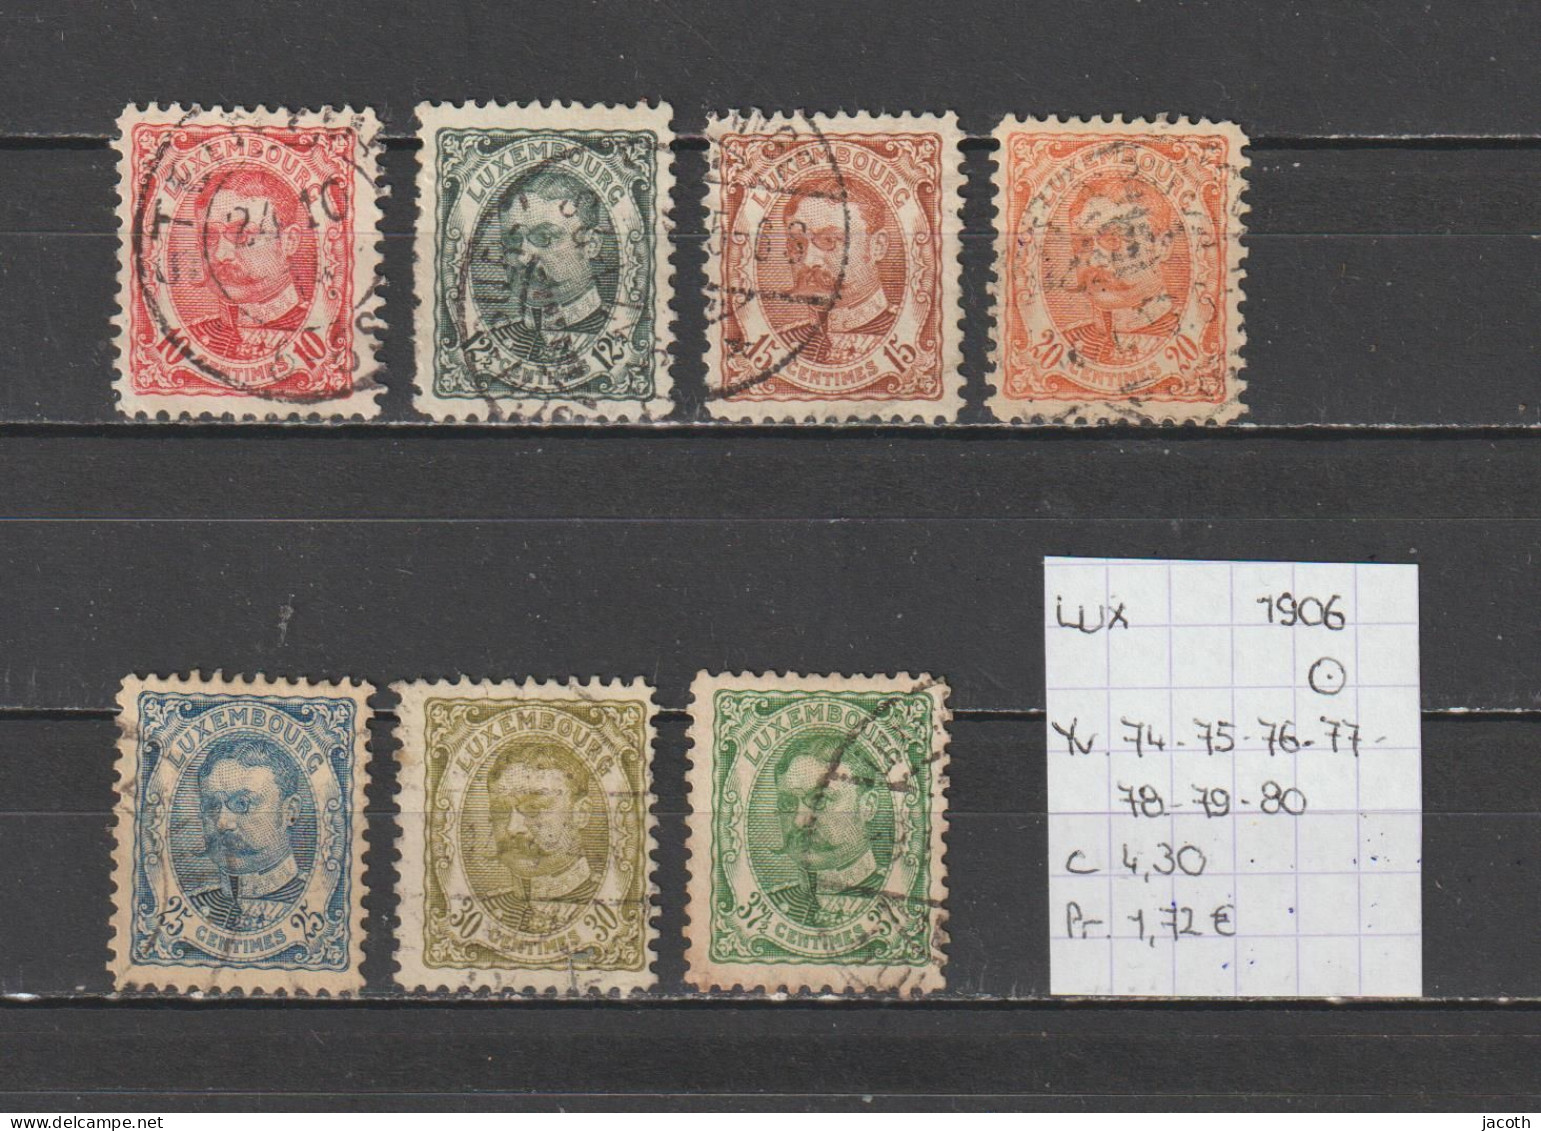 (TJ) Luxembourg 1906 - YT 74 + 75 + 76 + 77 + 78 + 79 + 80 (gest./obl./used) - 1906 Guillermo IV